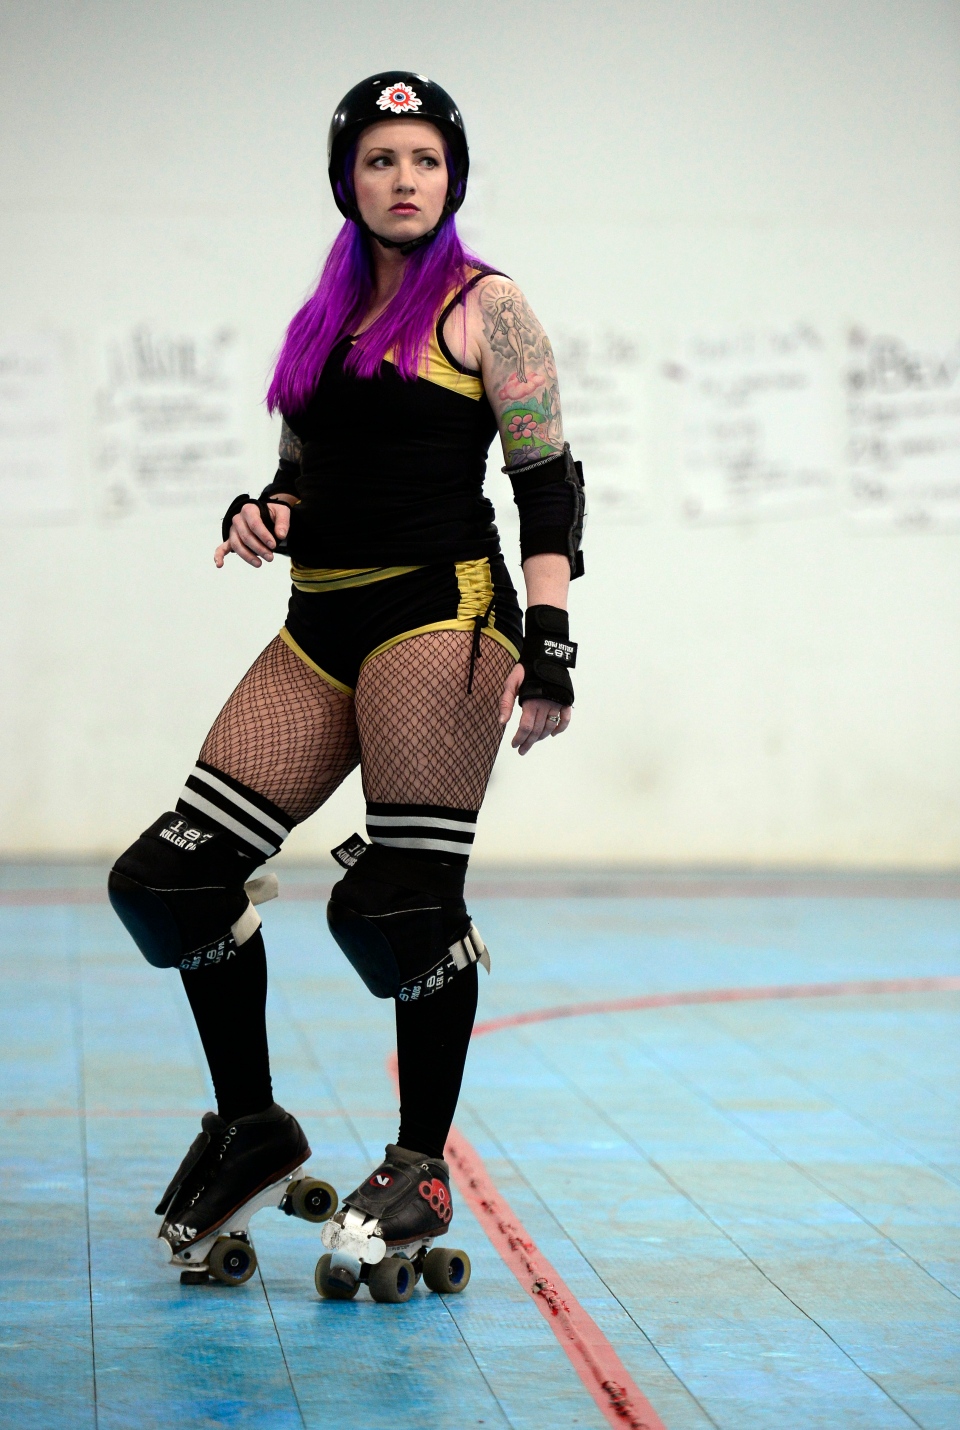 Roller derby germ jam: Swapping bacteria with every bump, slam | CTV News